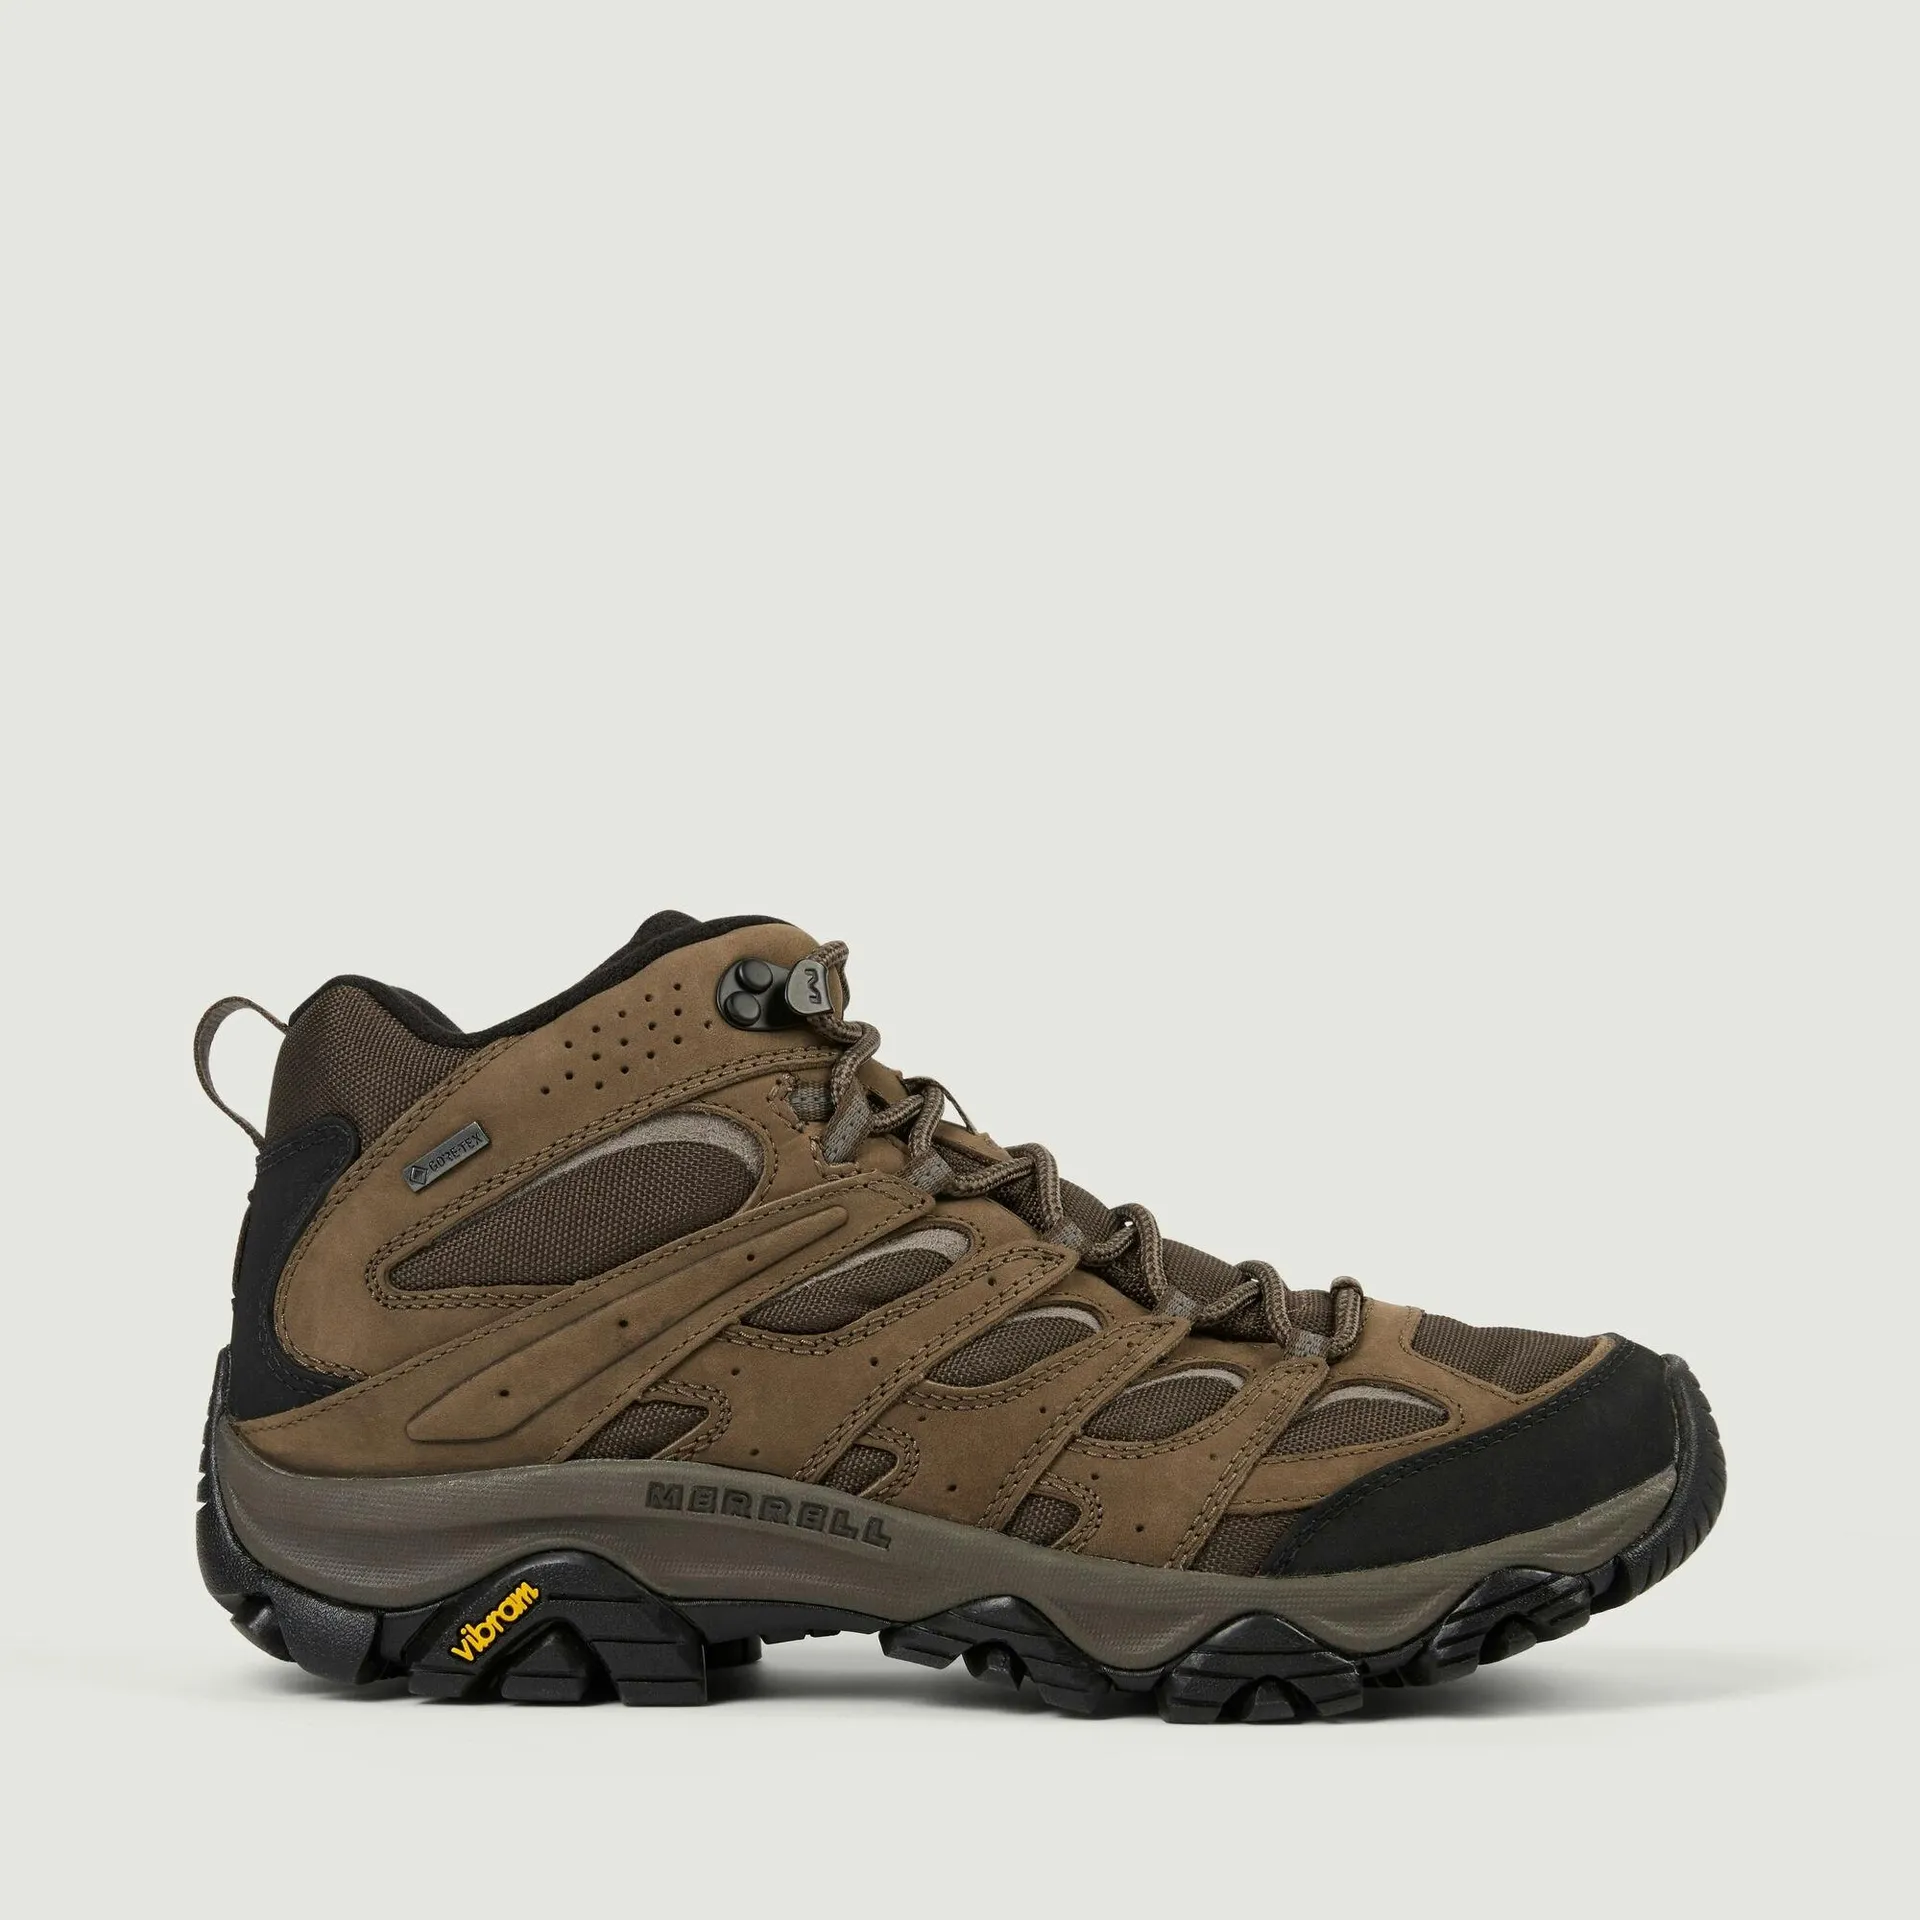 Merrell Moab 3 Smooth Mid Gore-Tex Men's Waterproof Hiking Boots